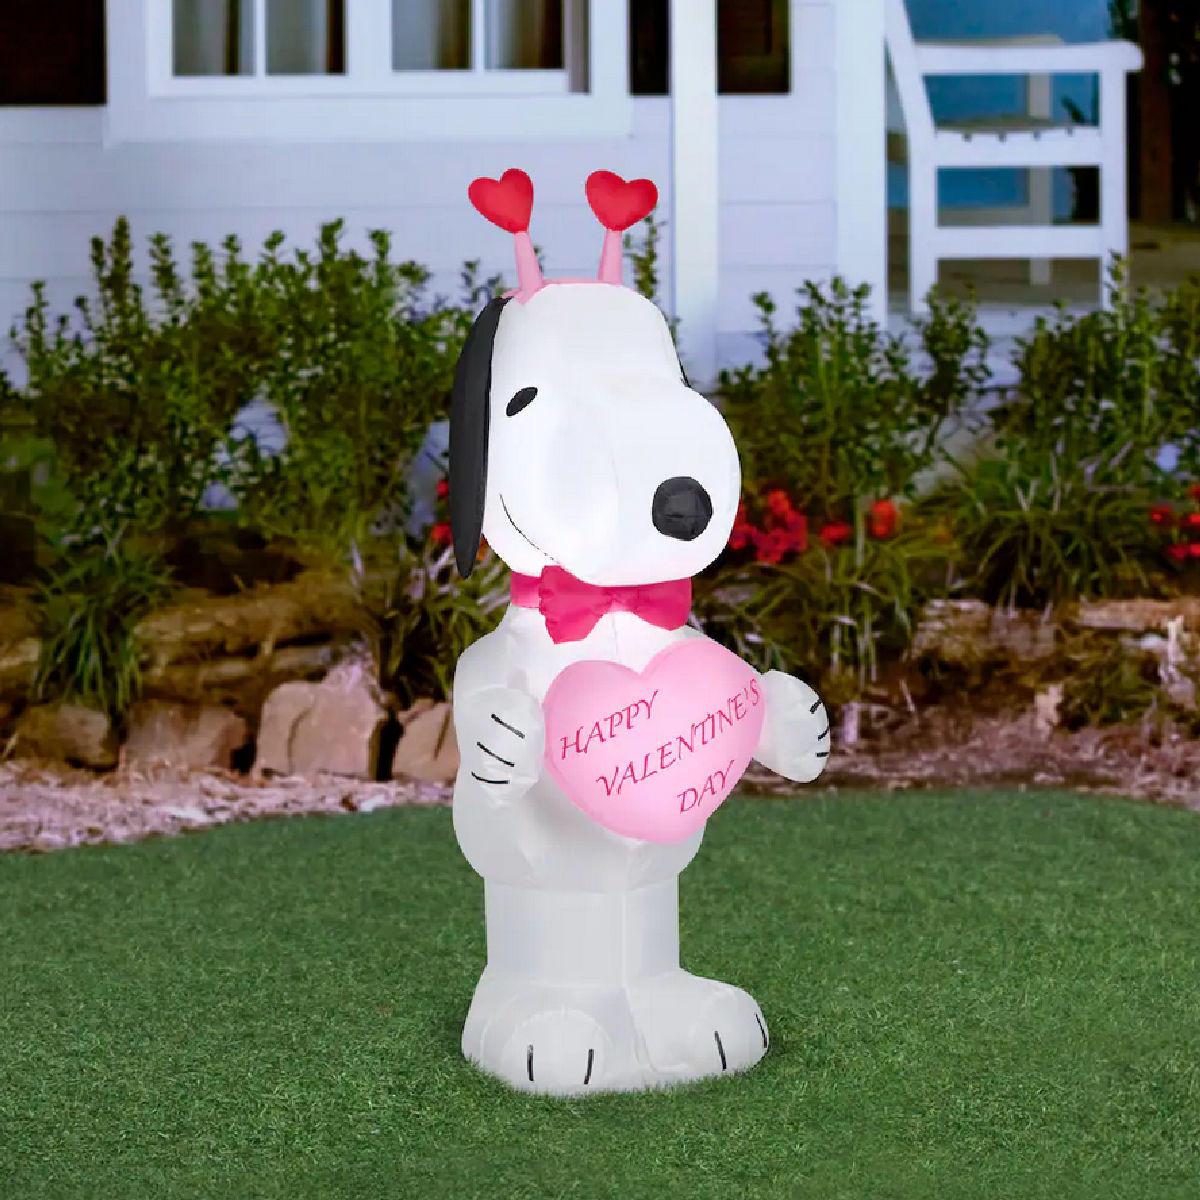 Airblown Valentine's Day 3.5 ft. Inflatable Snoopy Decoration